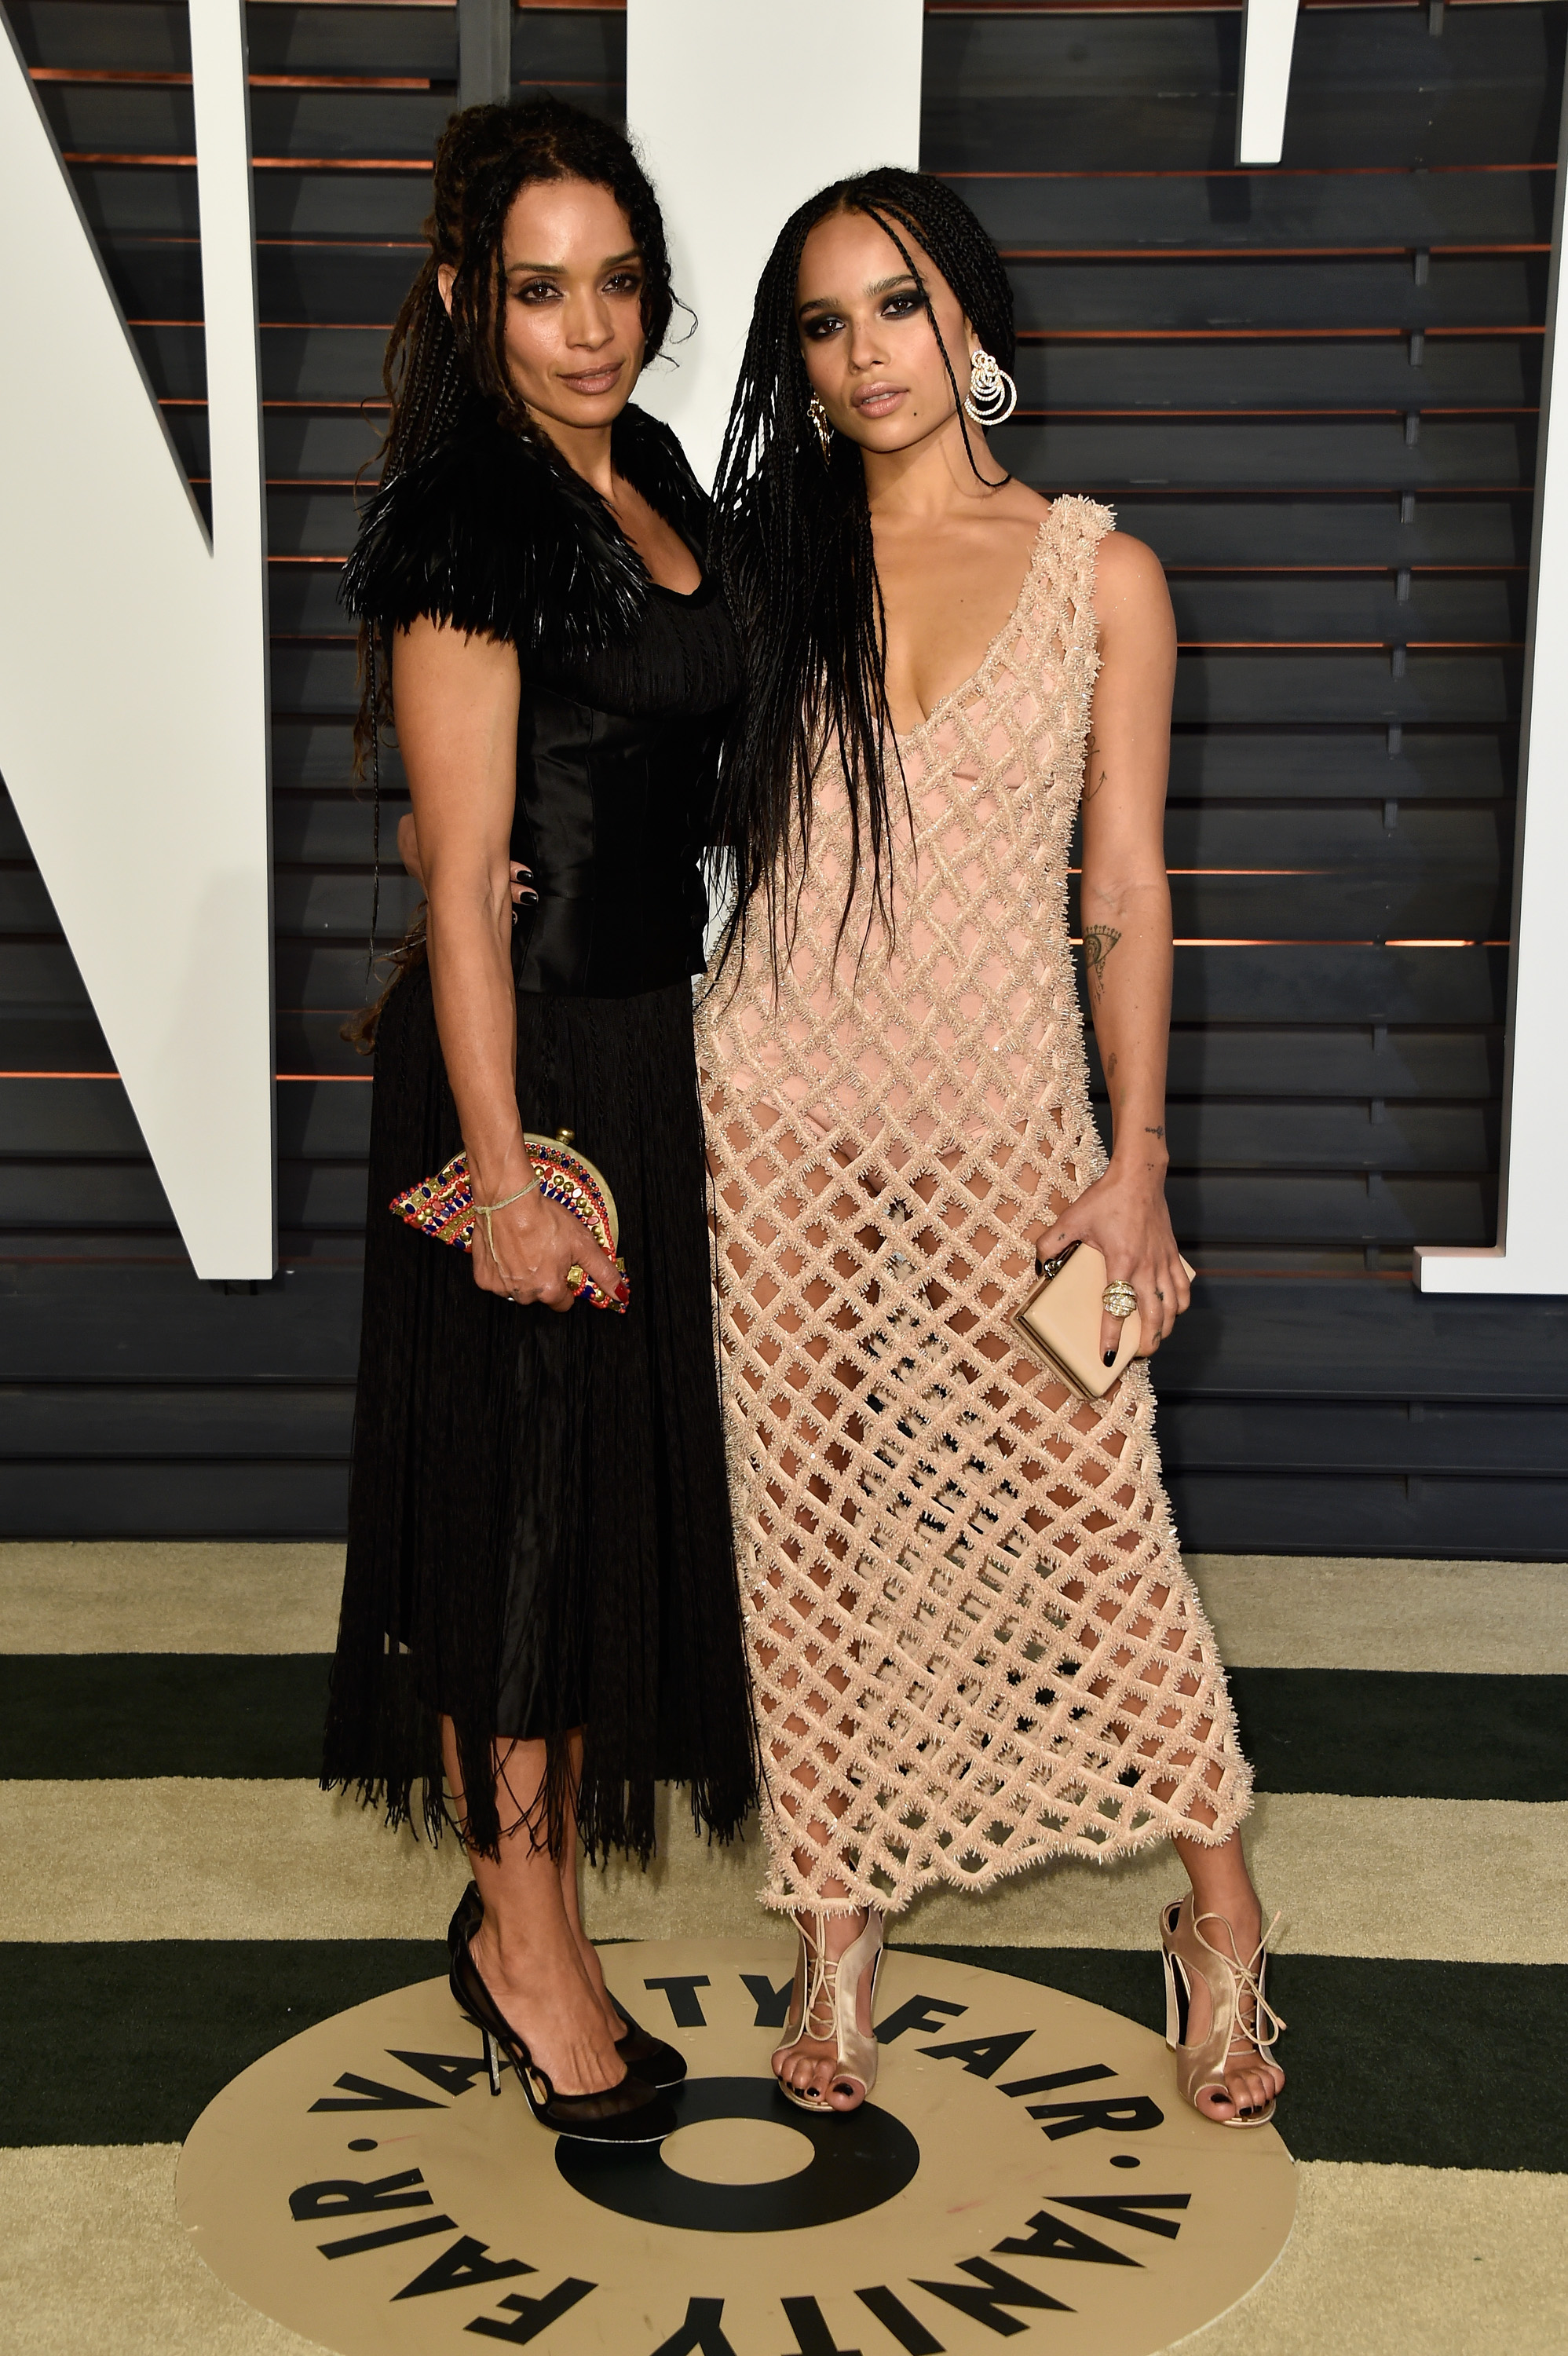 Actresses Lisa Bonet and Zoe Kravitz attend the 2015 Vanity Fair Oscar Party on February 22, 2015 (Photo by Pascal Le Segretain/Getty Images) (Getty Images—2015 Getty Images)